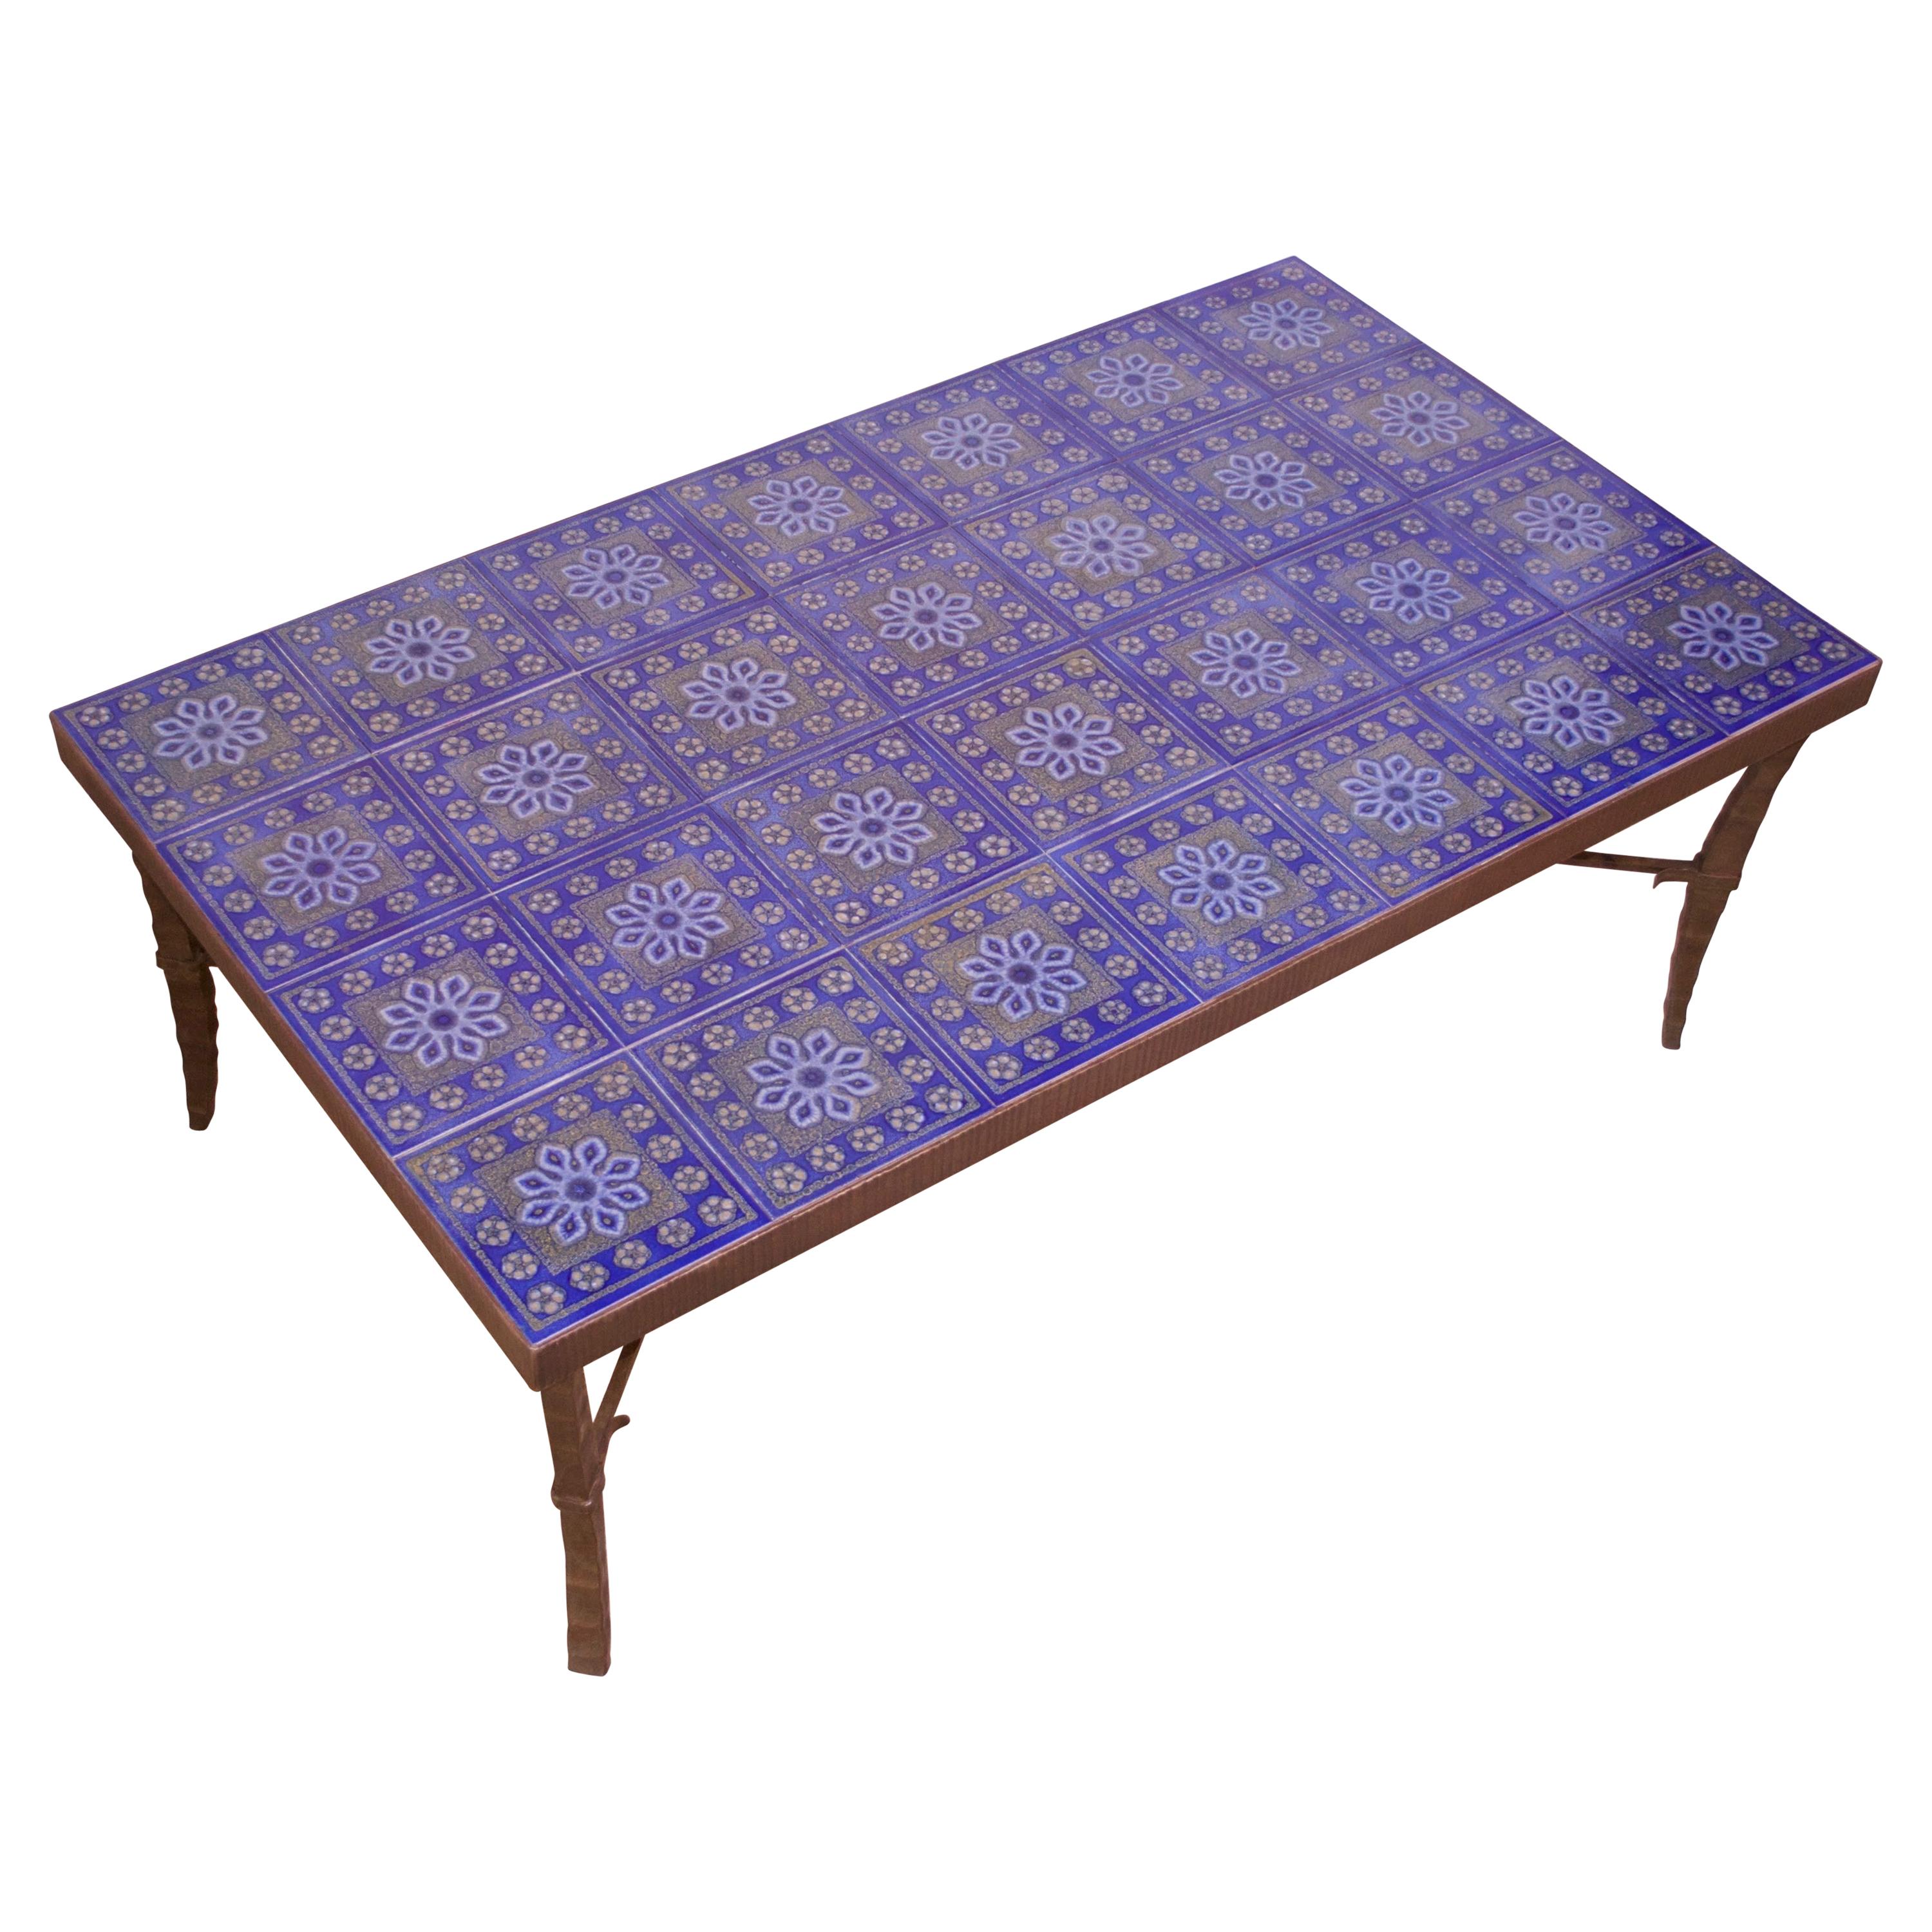 Large Scandinavian Modern Forged Bronze and Ceramic Tile Coffee Table